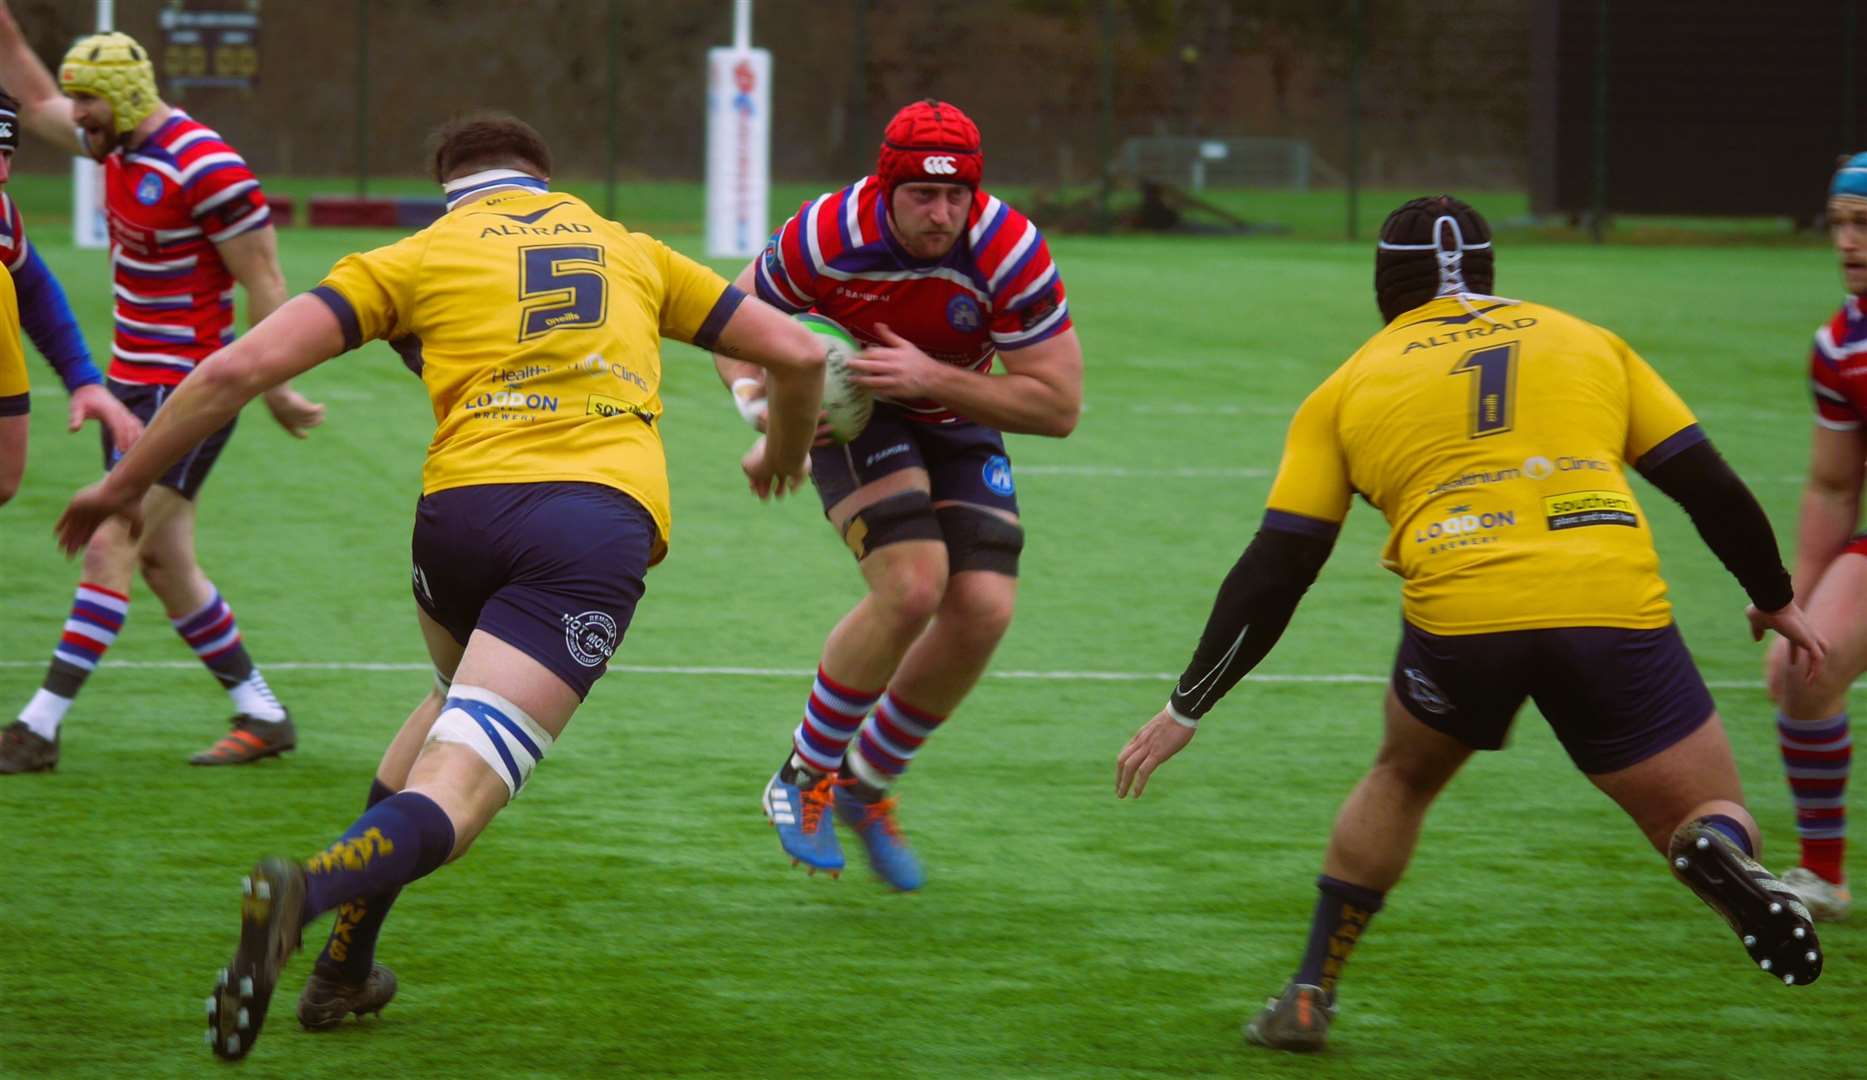 Tonbridge Juddians' Ryan Munnelly on the attack on Saturday. Picture: Adam Hookway